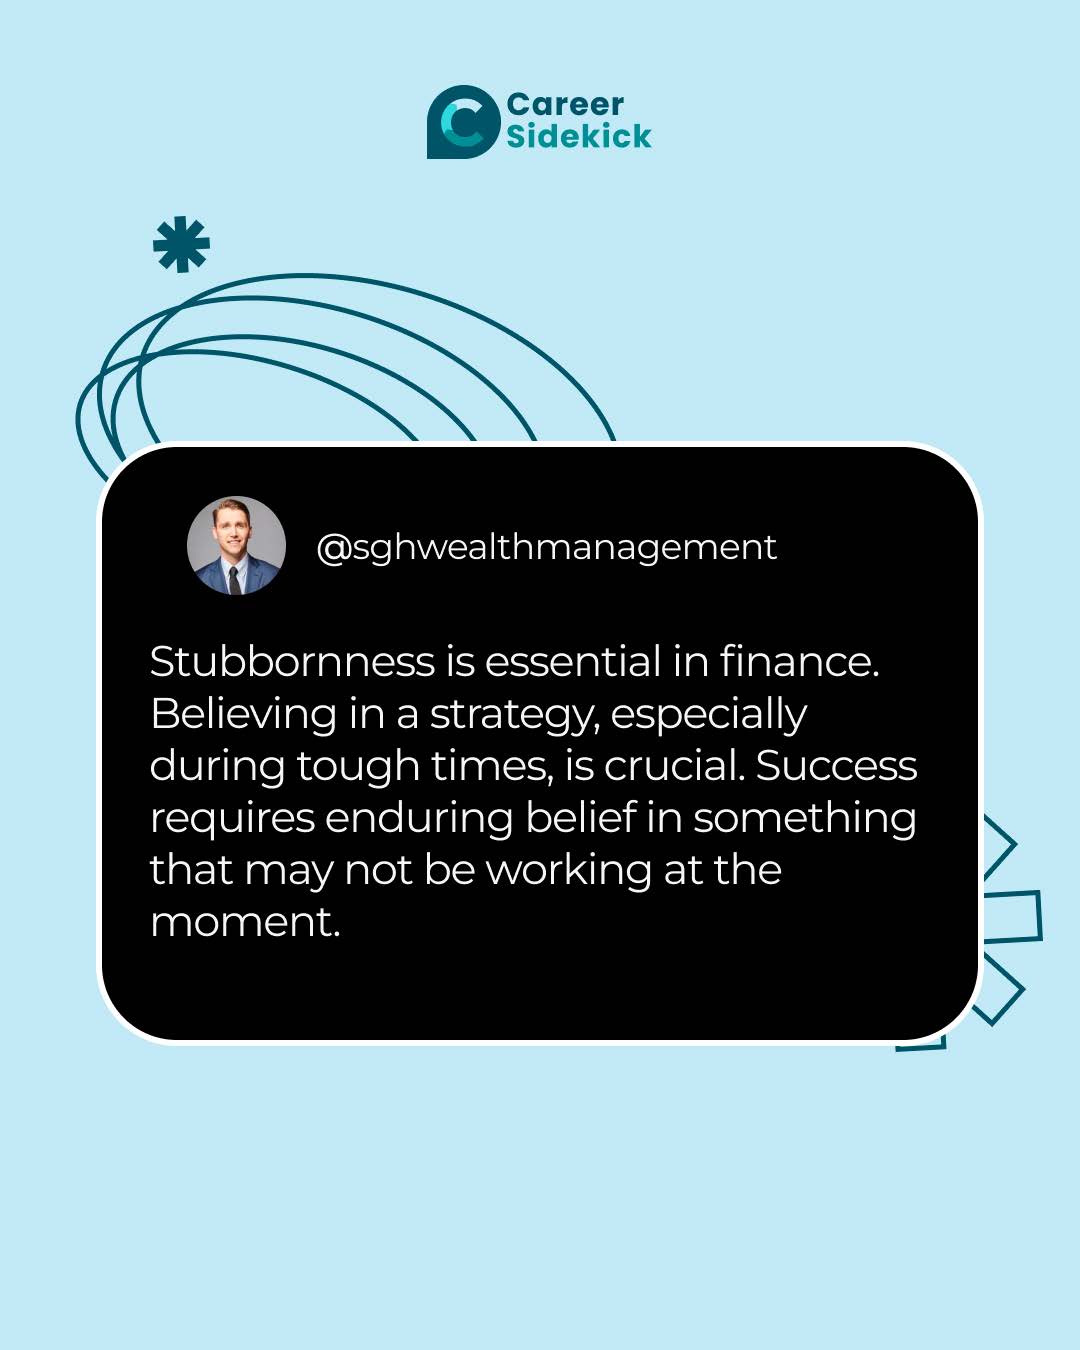 Stubbornness is essential in finance. Believing in a strategy, especially during tough times, is crucial. Success requires enduring belief in something that may not be working at the moment.